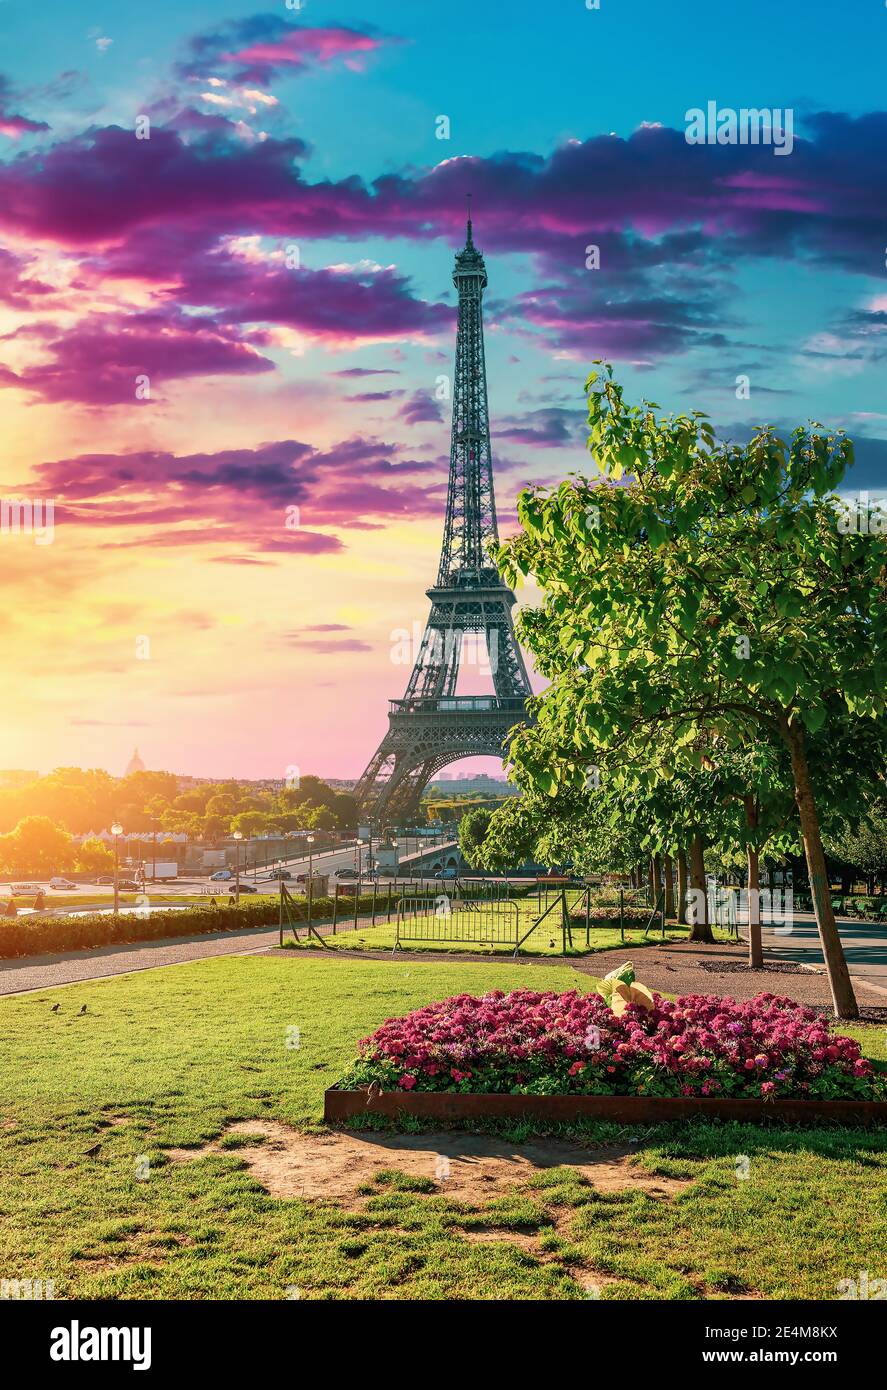 Metal Eiffel Tower and garden in Paris, France Stock Photo